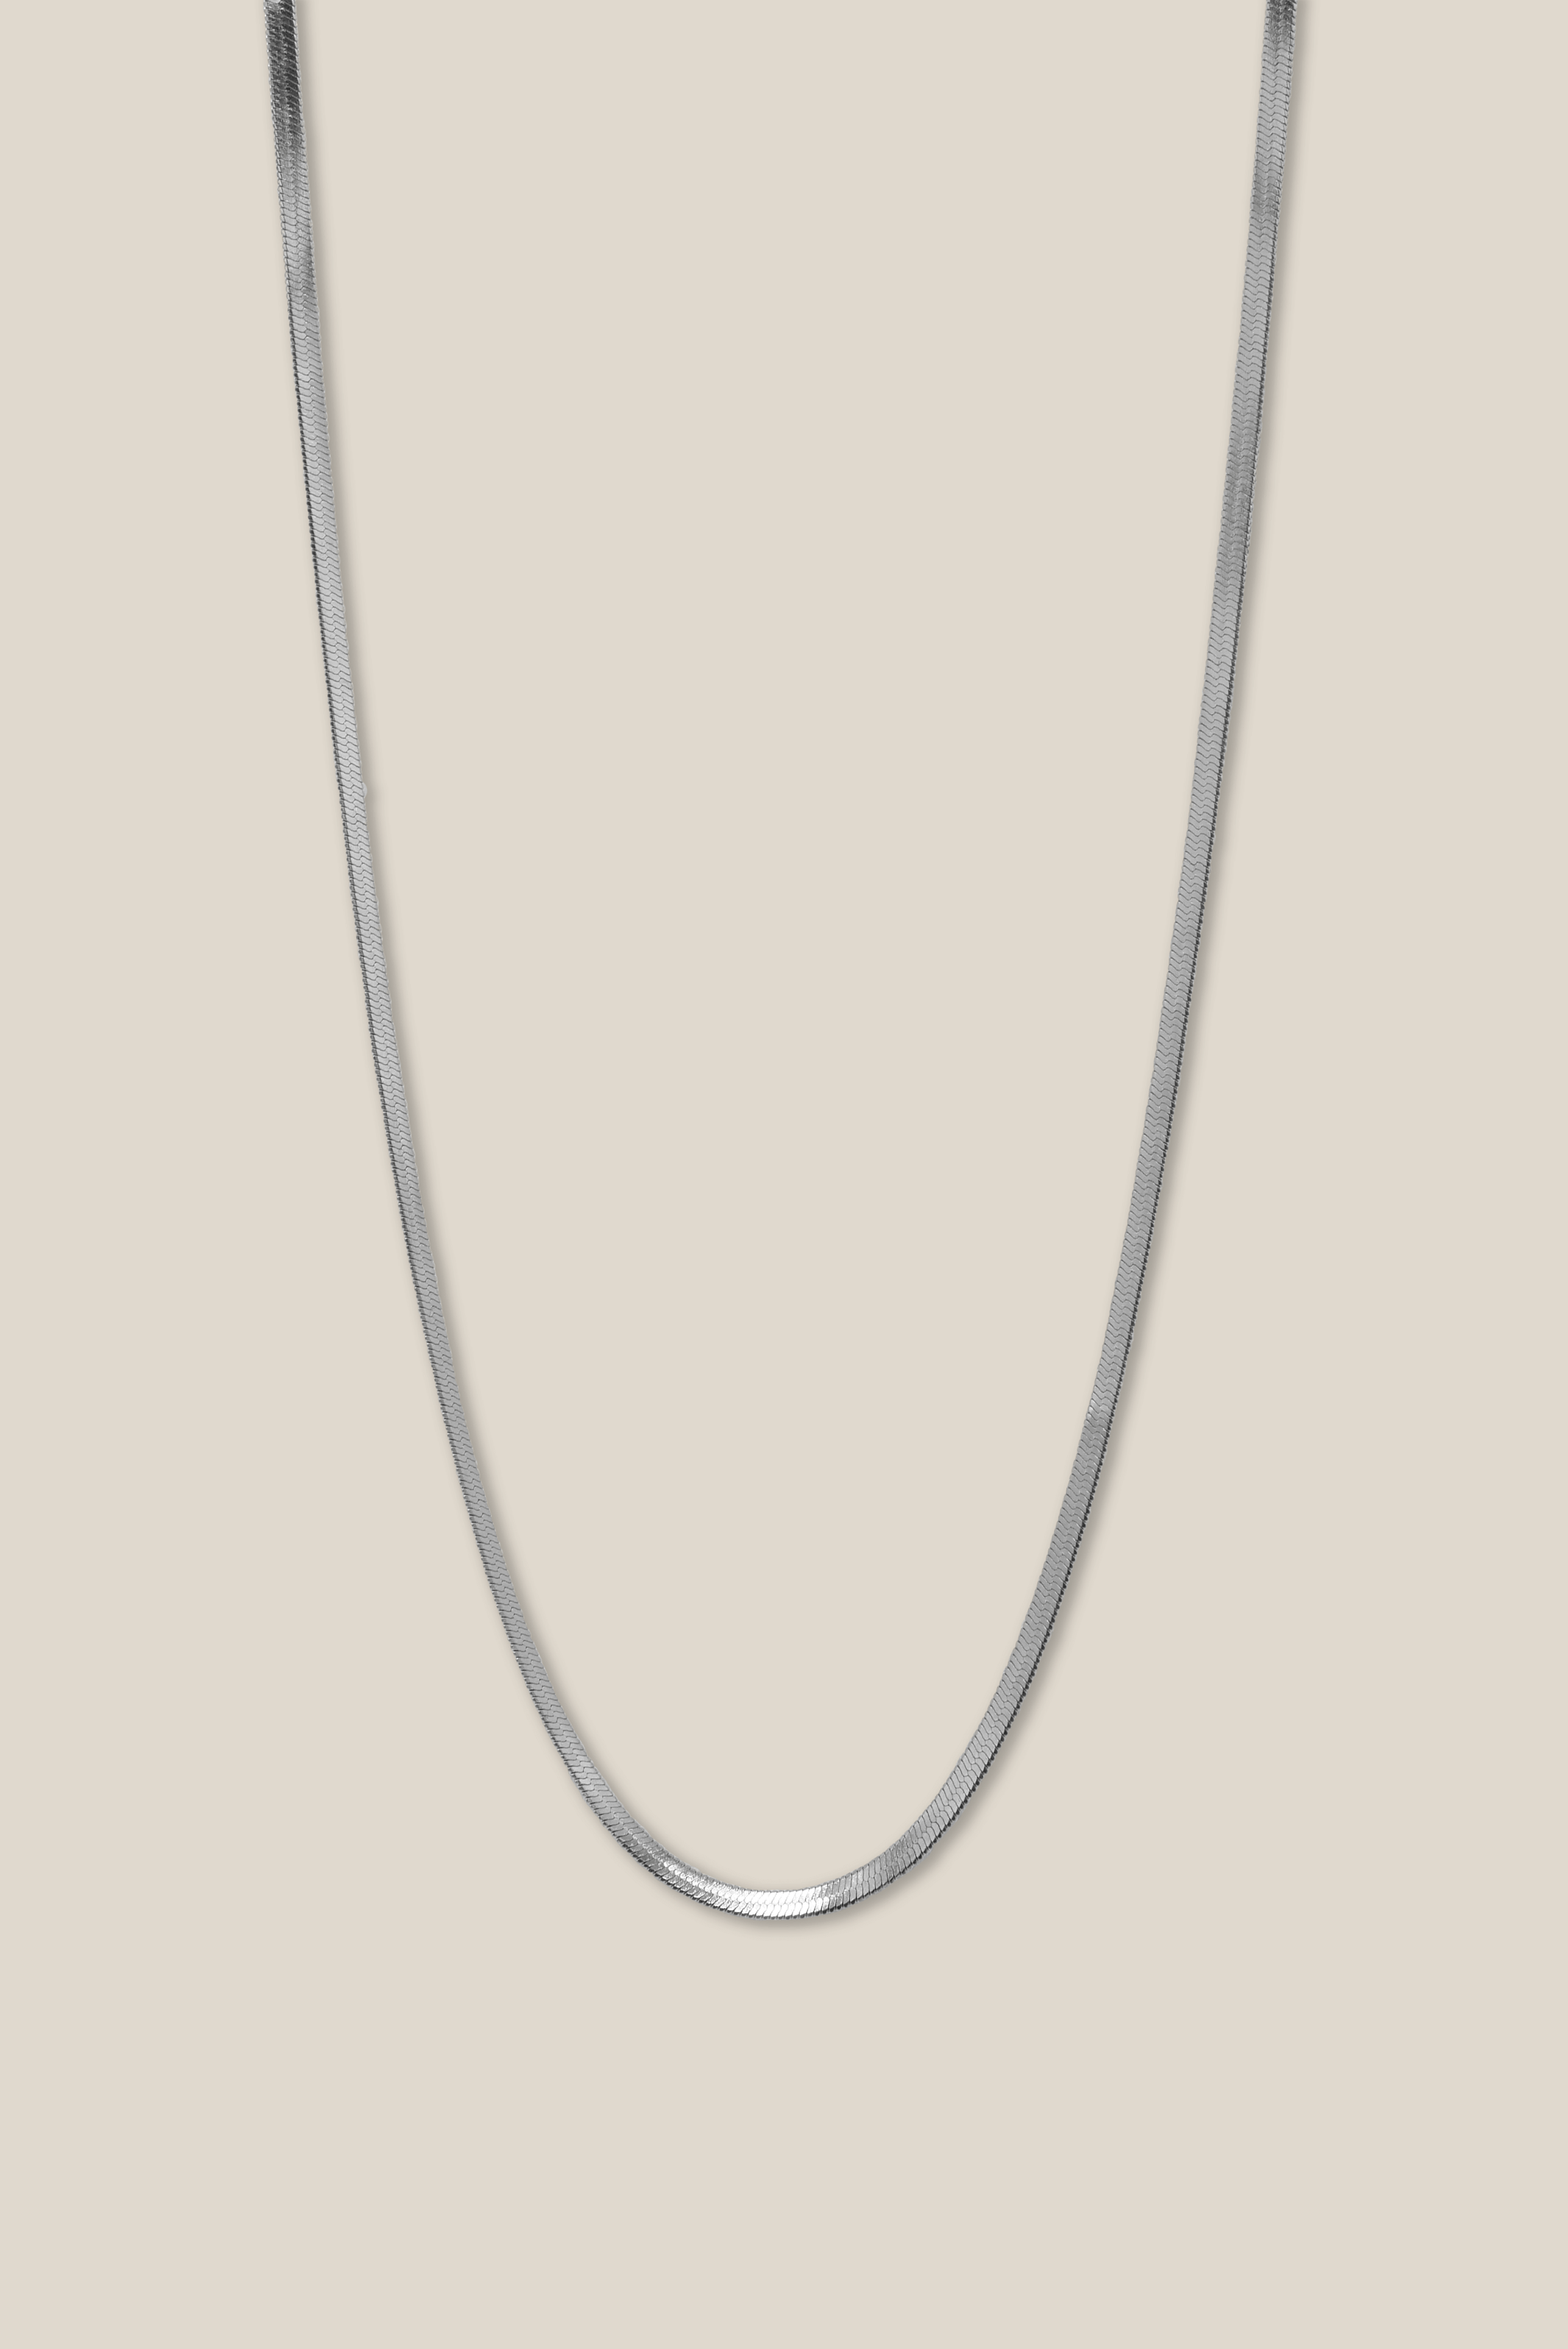 3mm SURF SILVER (NECKLACE)